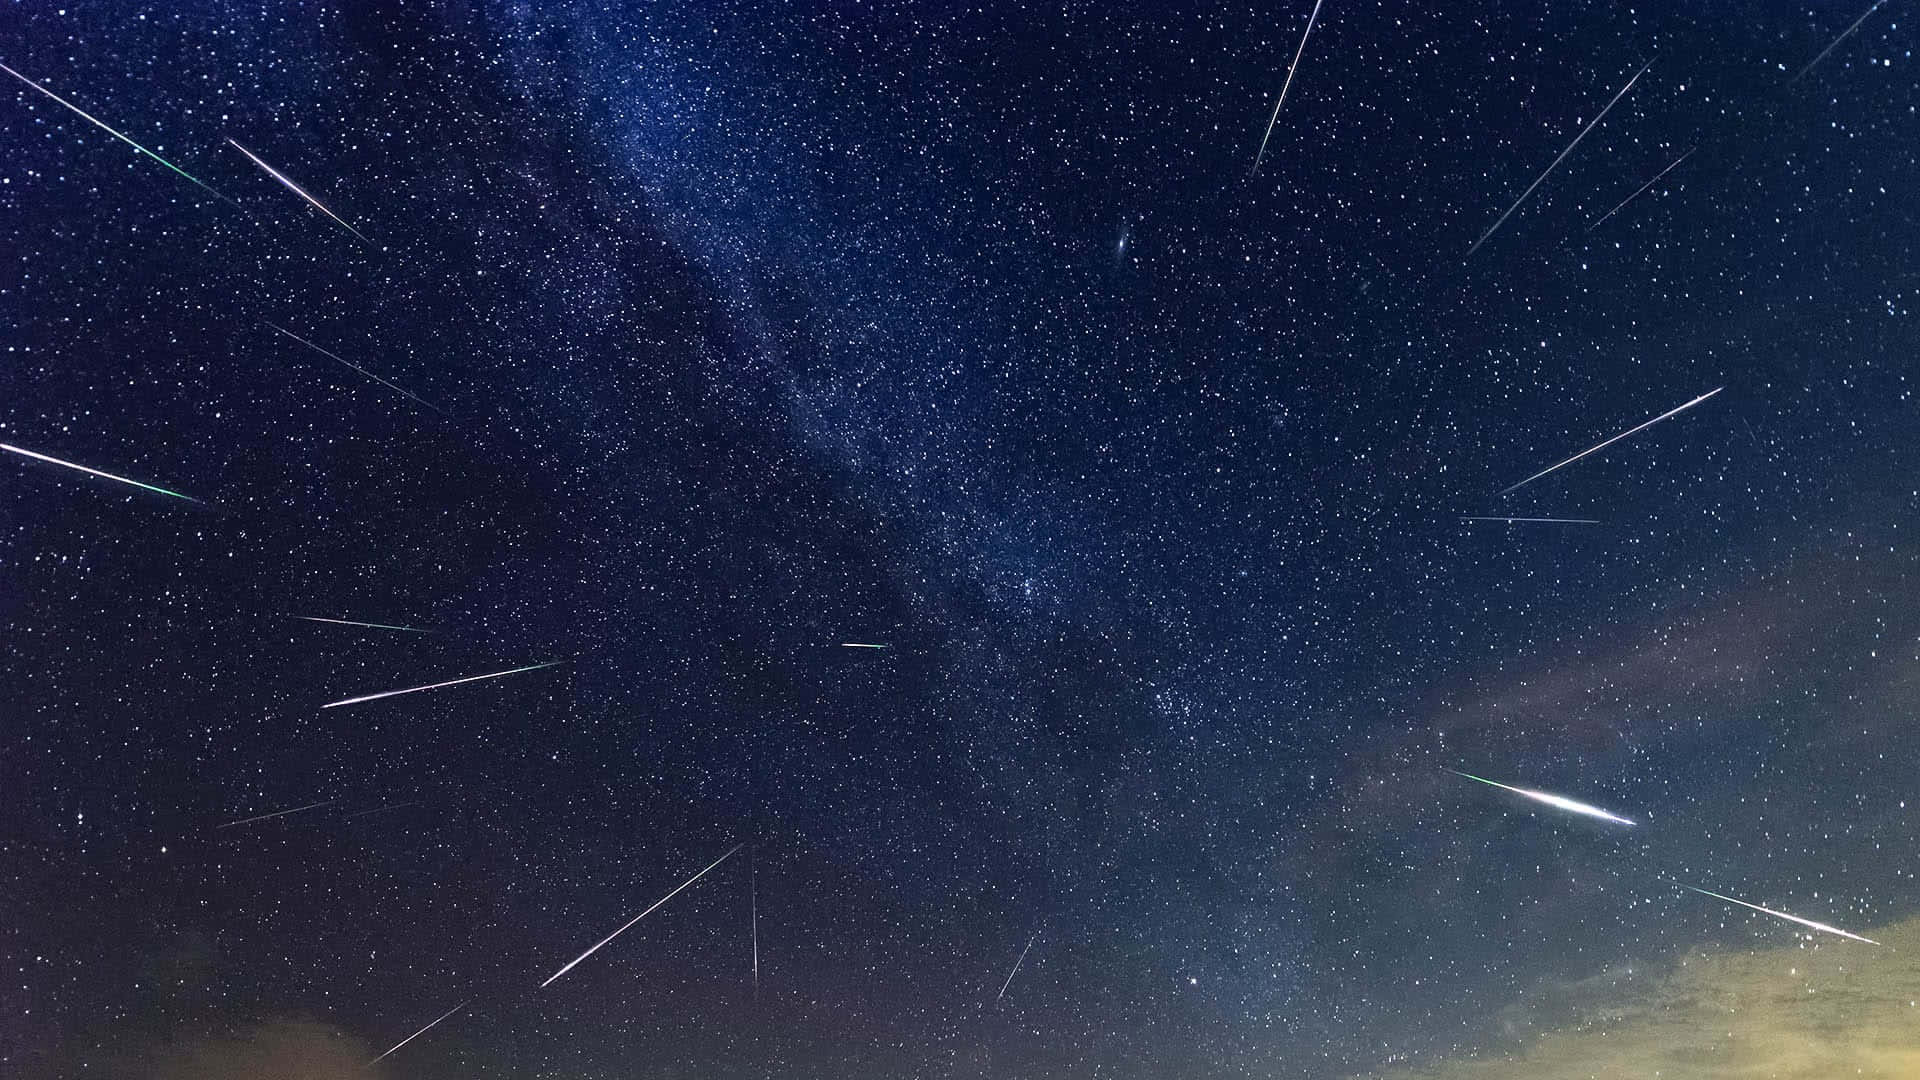 Look up and gaze in awe at the stunning beauty of a meteor in the sky!